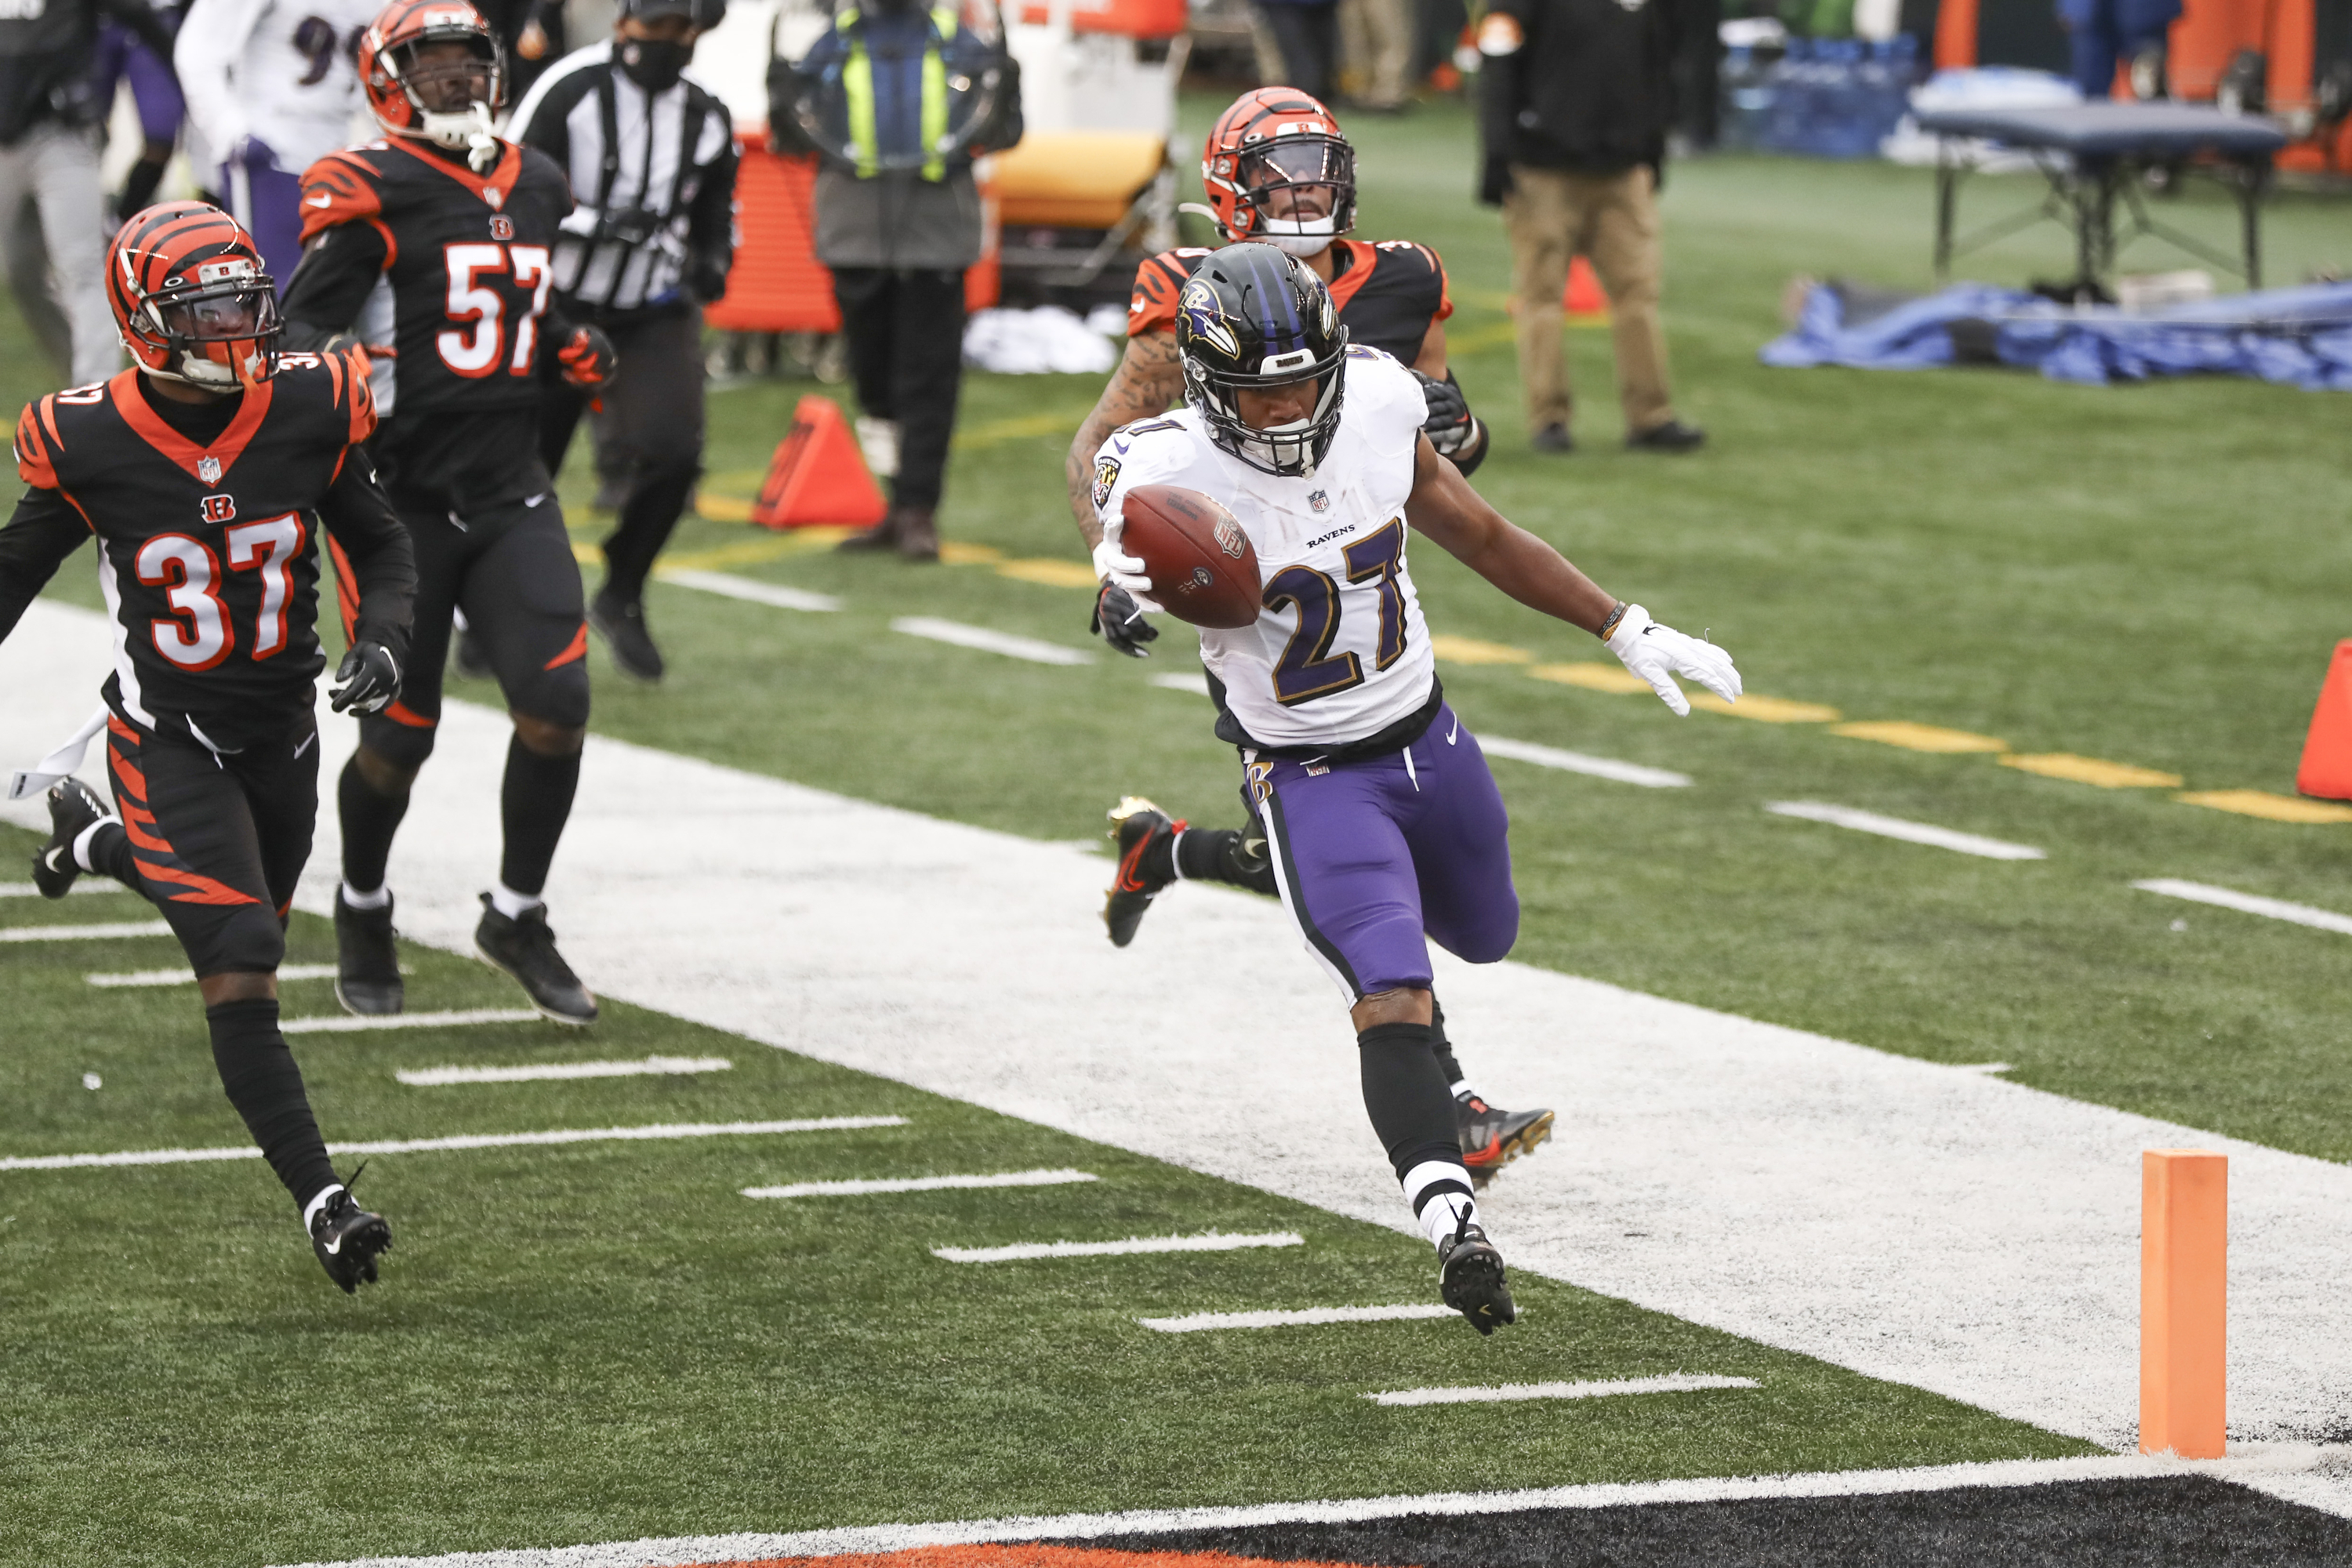 Instant analysis after Bengals beat Ravens, setting up playoff rematch